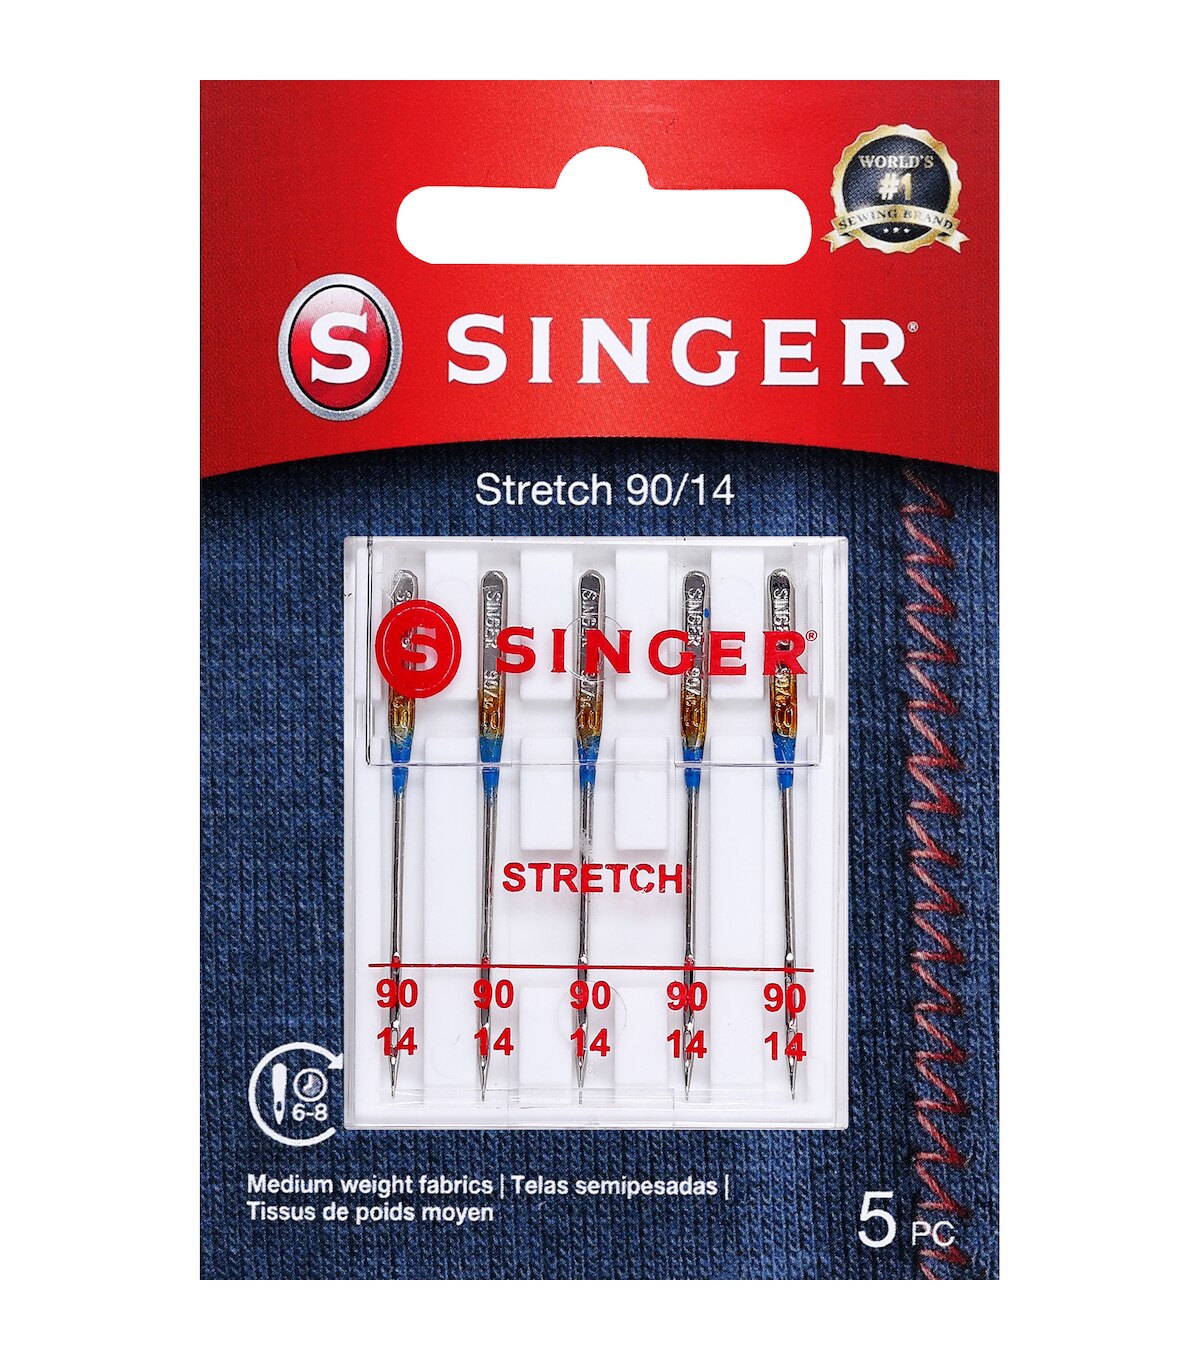 Singer Sewing Needle Chart